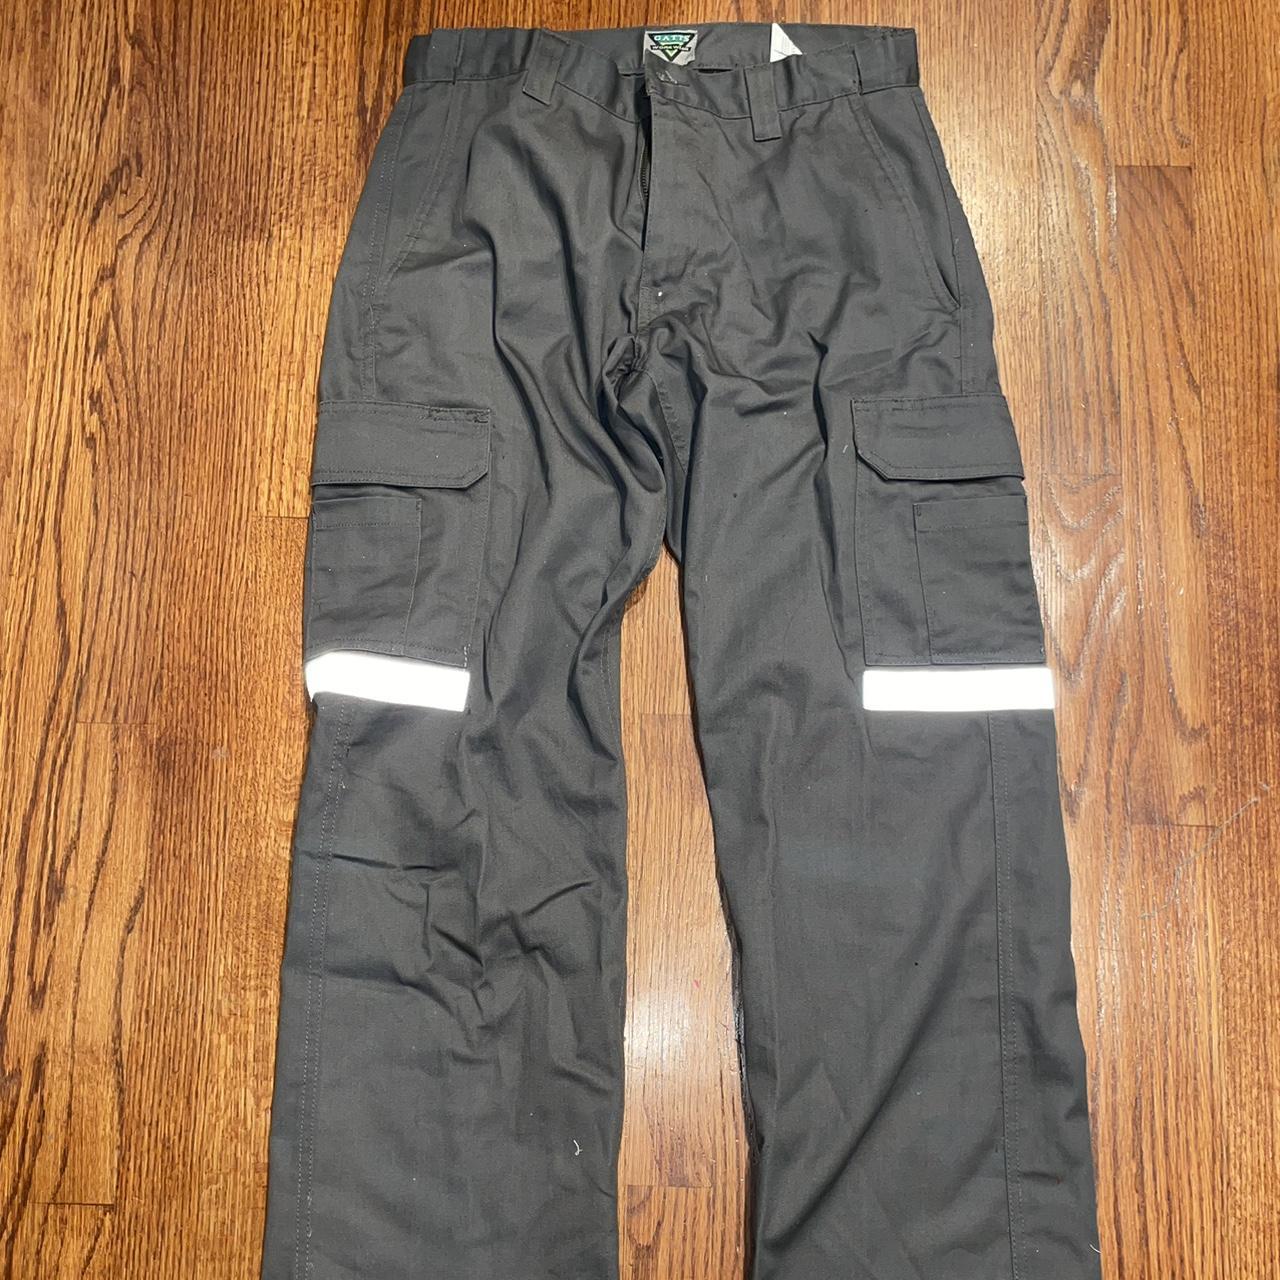 5.11 EMS Pants Review (5.11 Tactical Pants) - YouTube